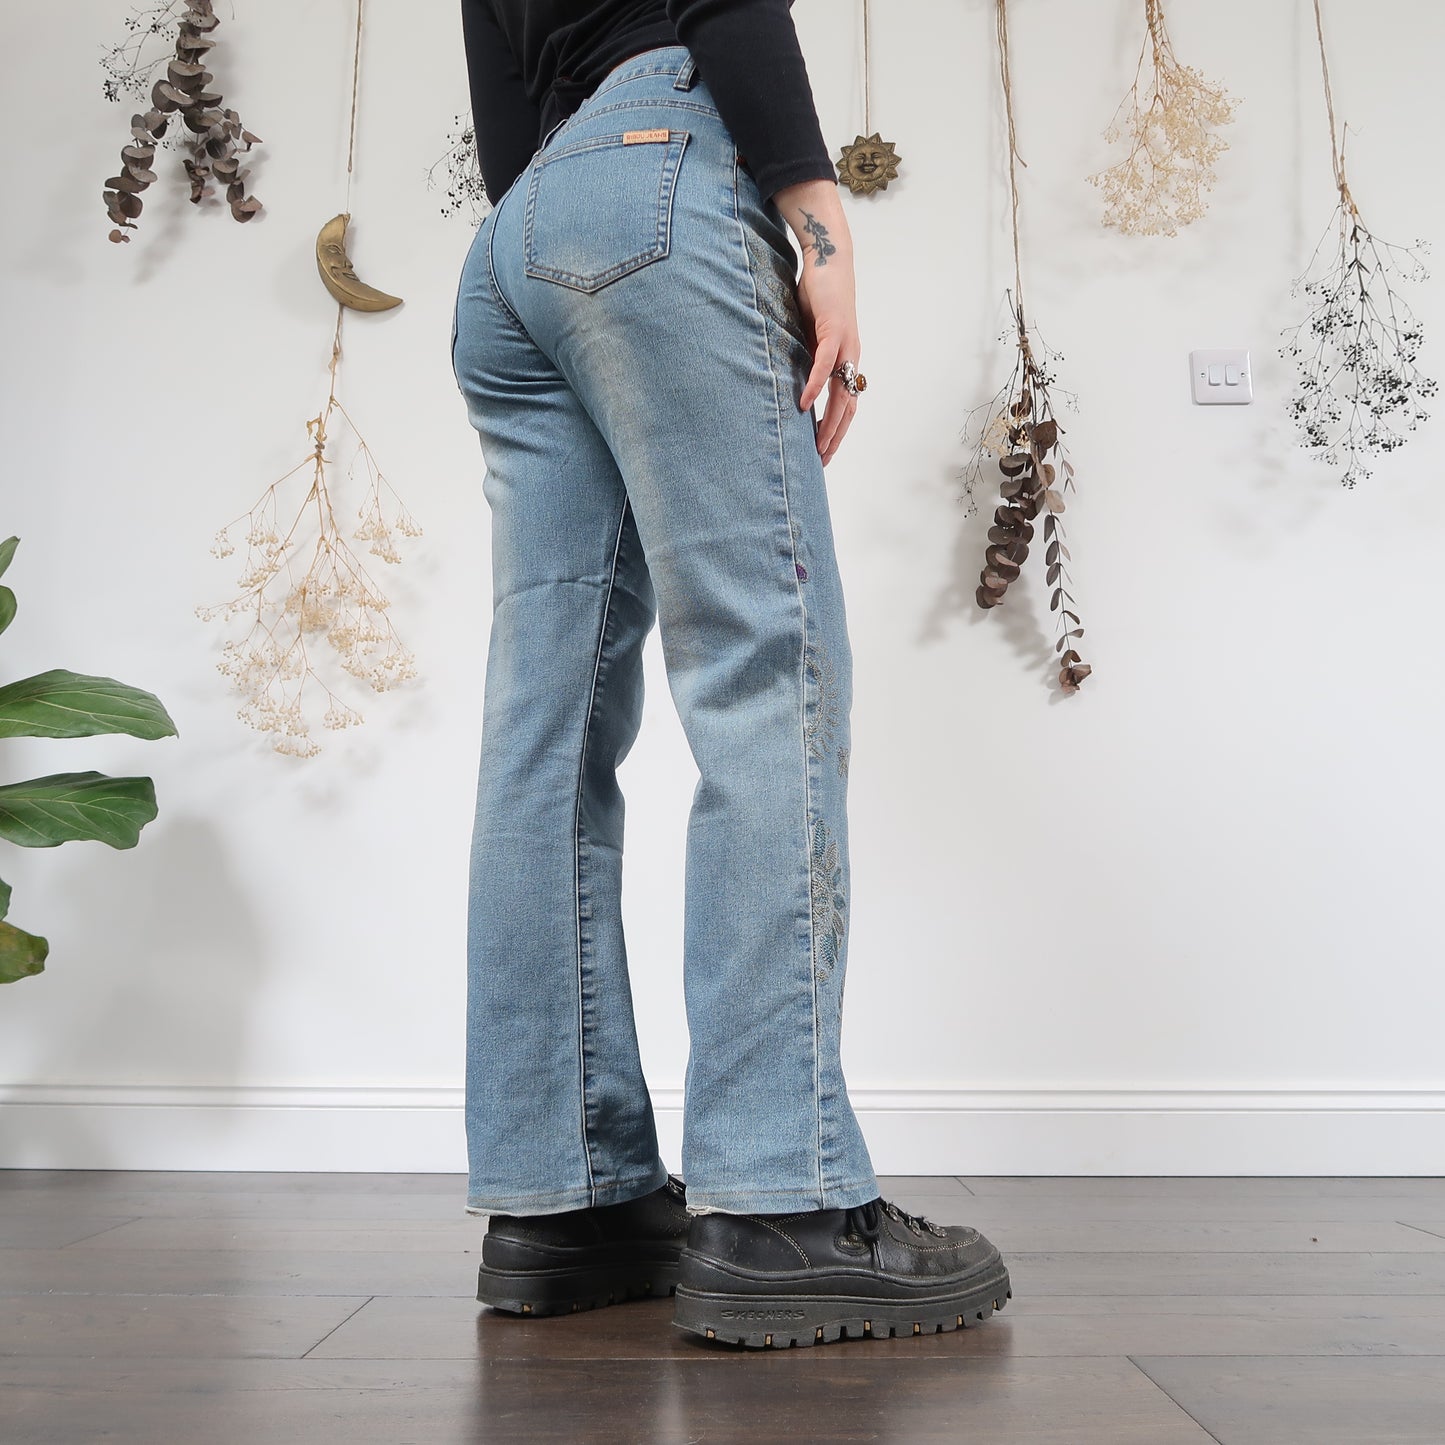 Embroidered jeans - 32"